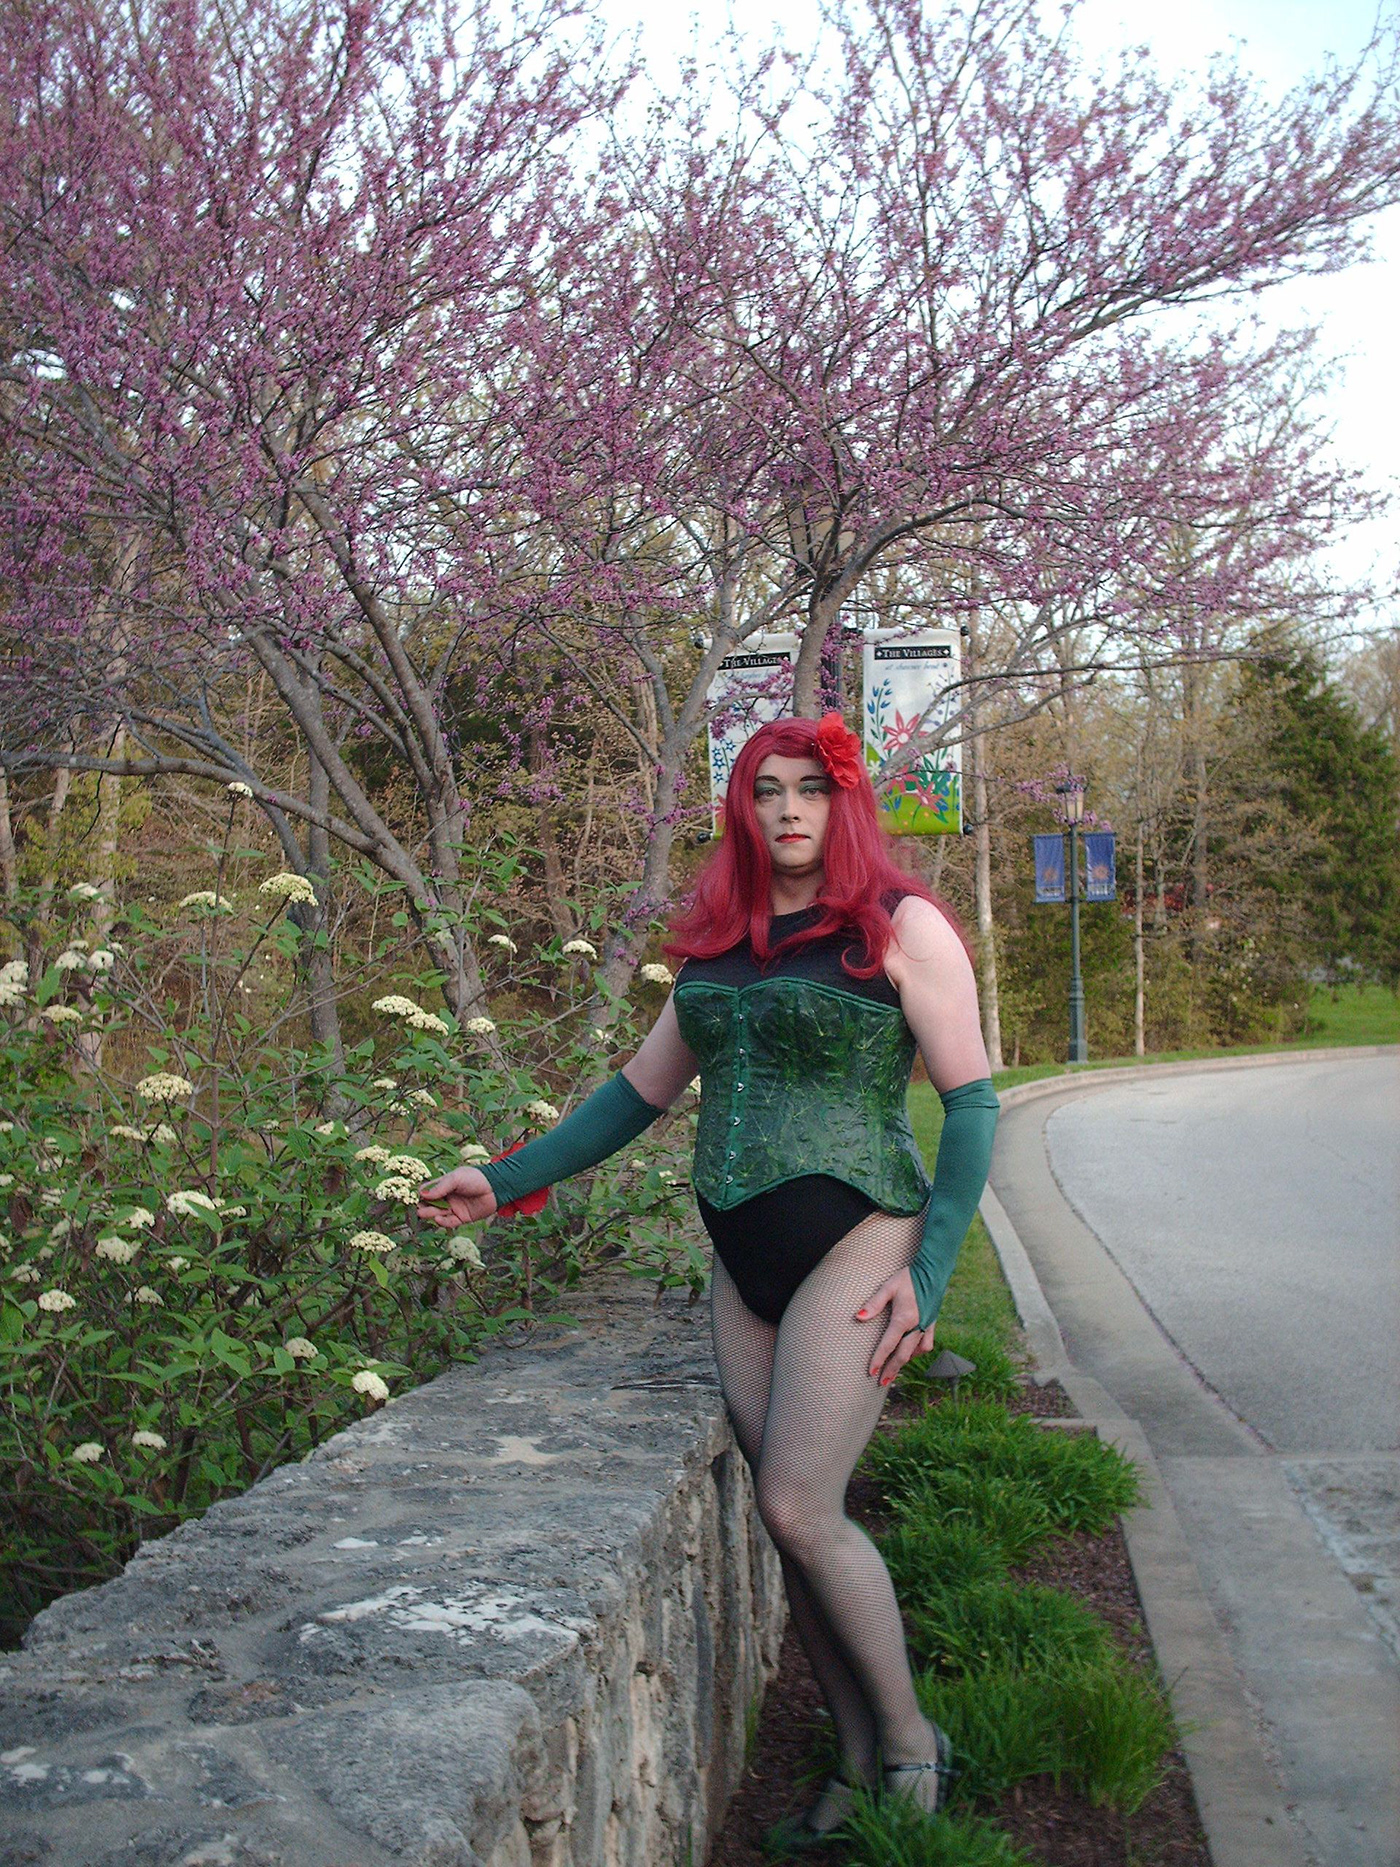 Cosplay crossplay poison ivy batman Dc Comics spring fishnets Park trees redheads